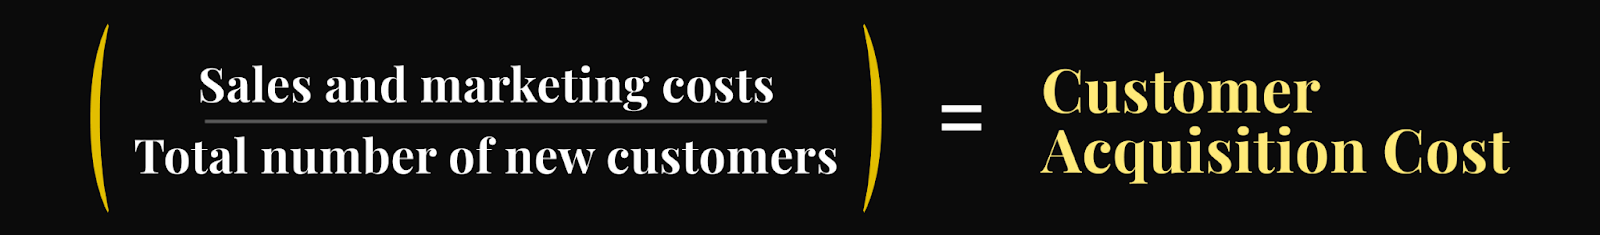 Sales and marketing costs divided by total number of new customers equals customer acquisition cost